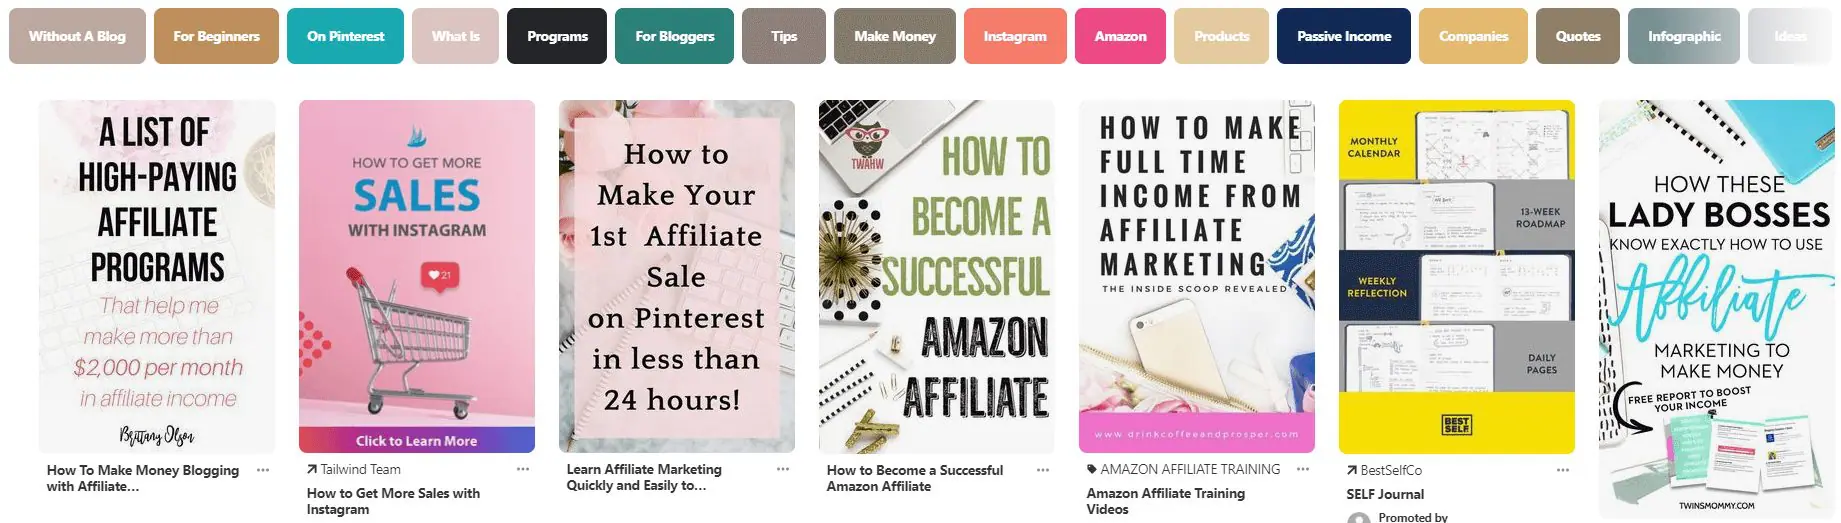 ClickBank for Beginners: A 7-Step Affiliate Starter's Guide from ClickBank  - ClickBank